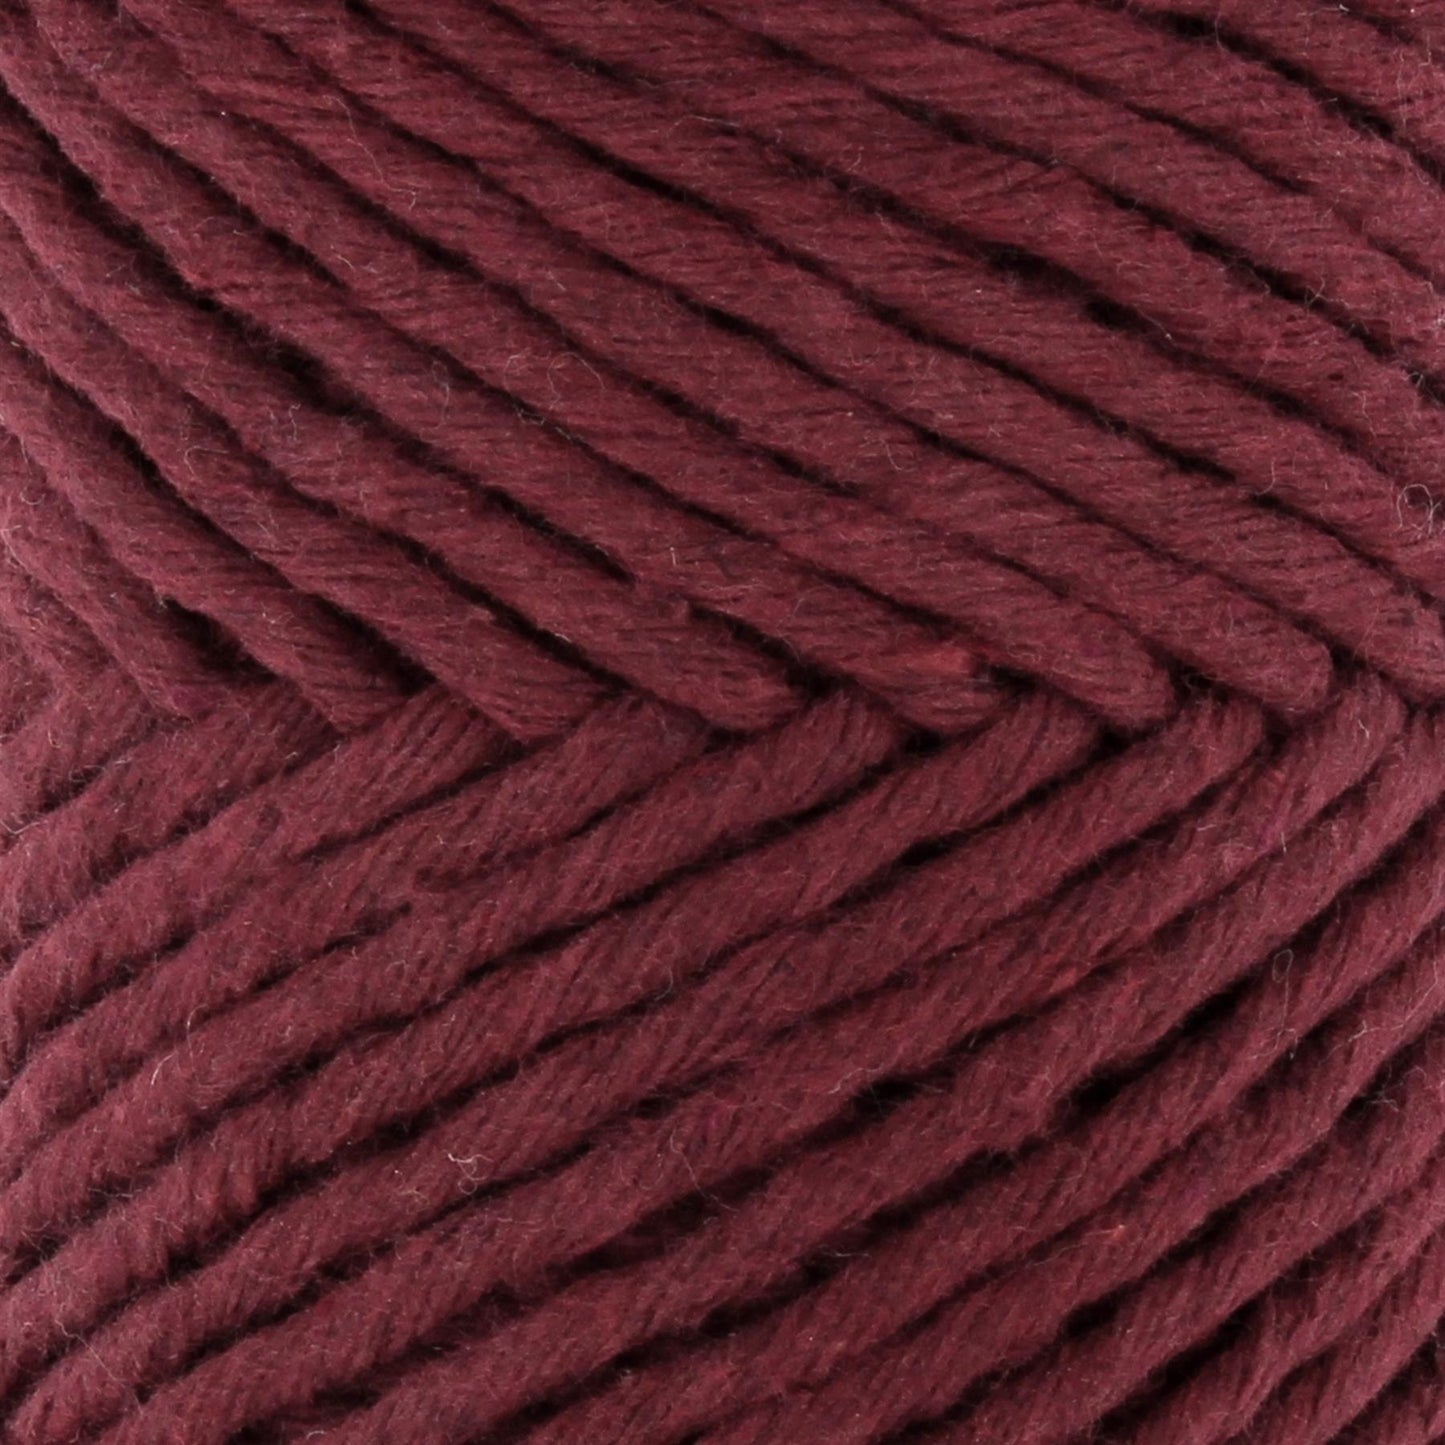 [Hoooked] S1050200 Spesso Chunky Berry Cotton Yarn - 50M, 200g